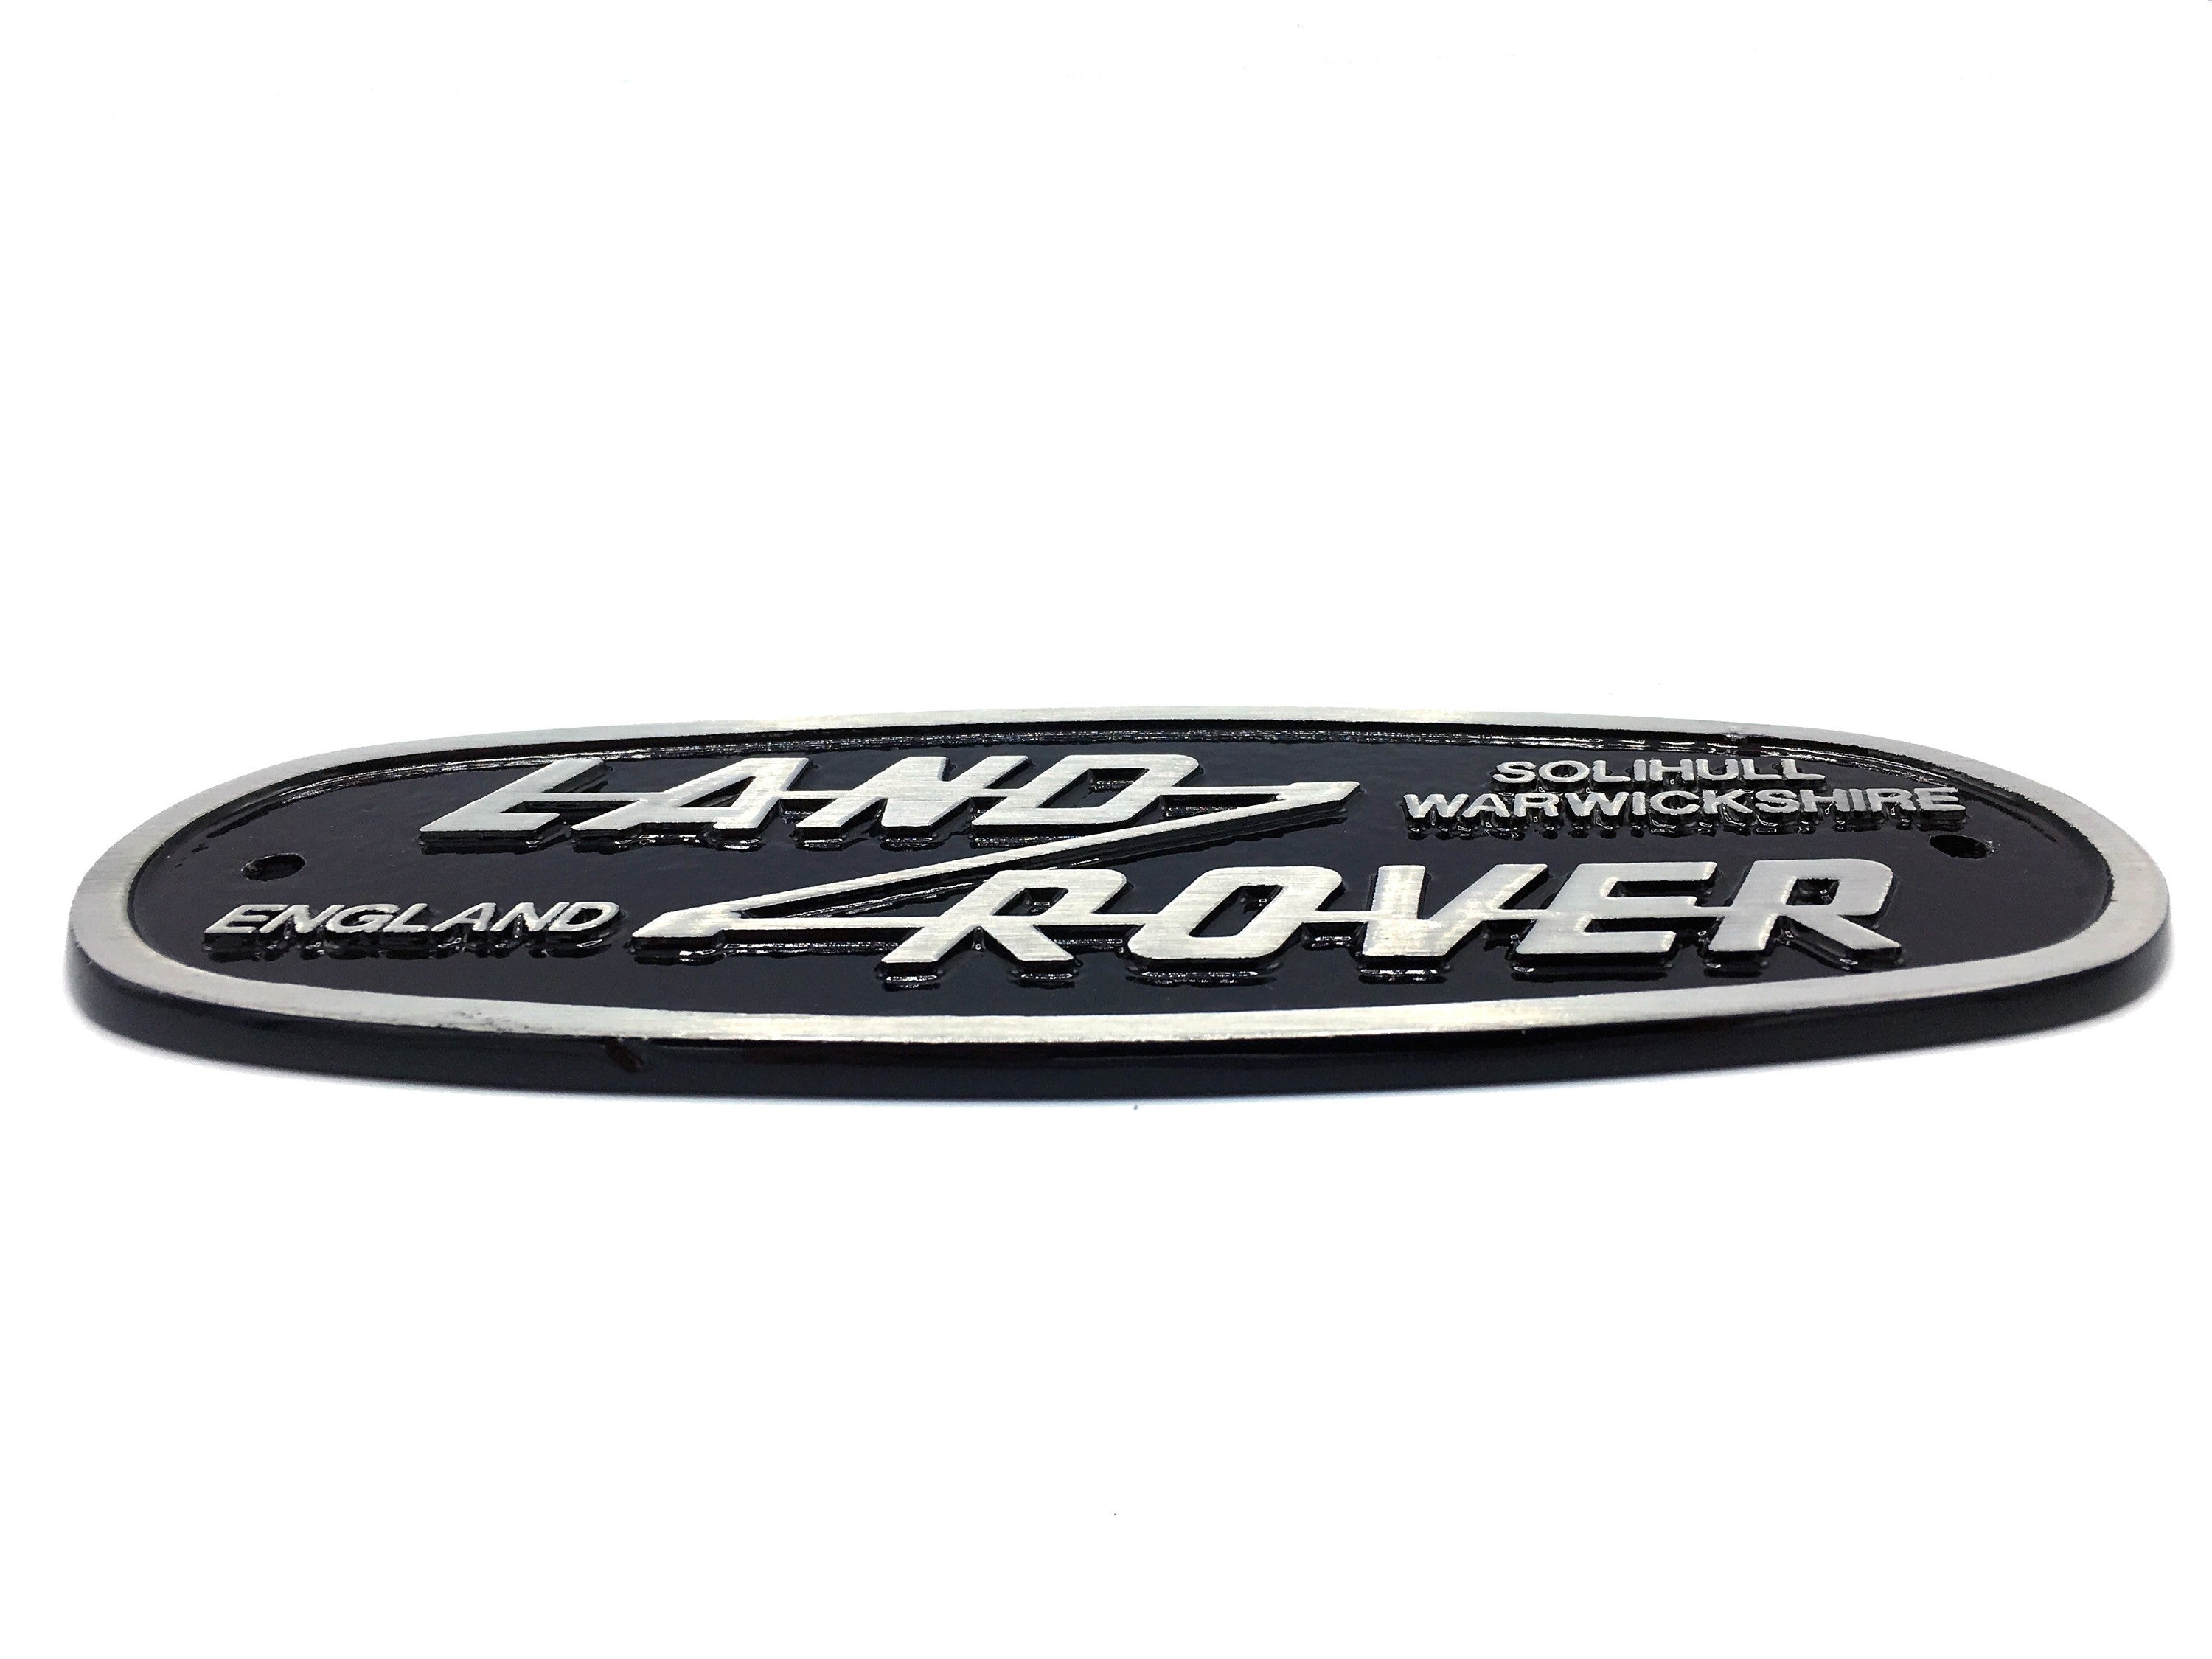 "Land Rover Solihull" Oval Grille Badge (Cast Aluminum) - for Series or Defender